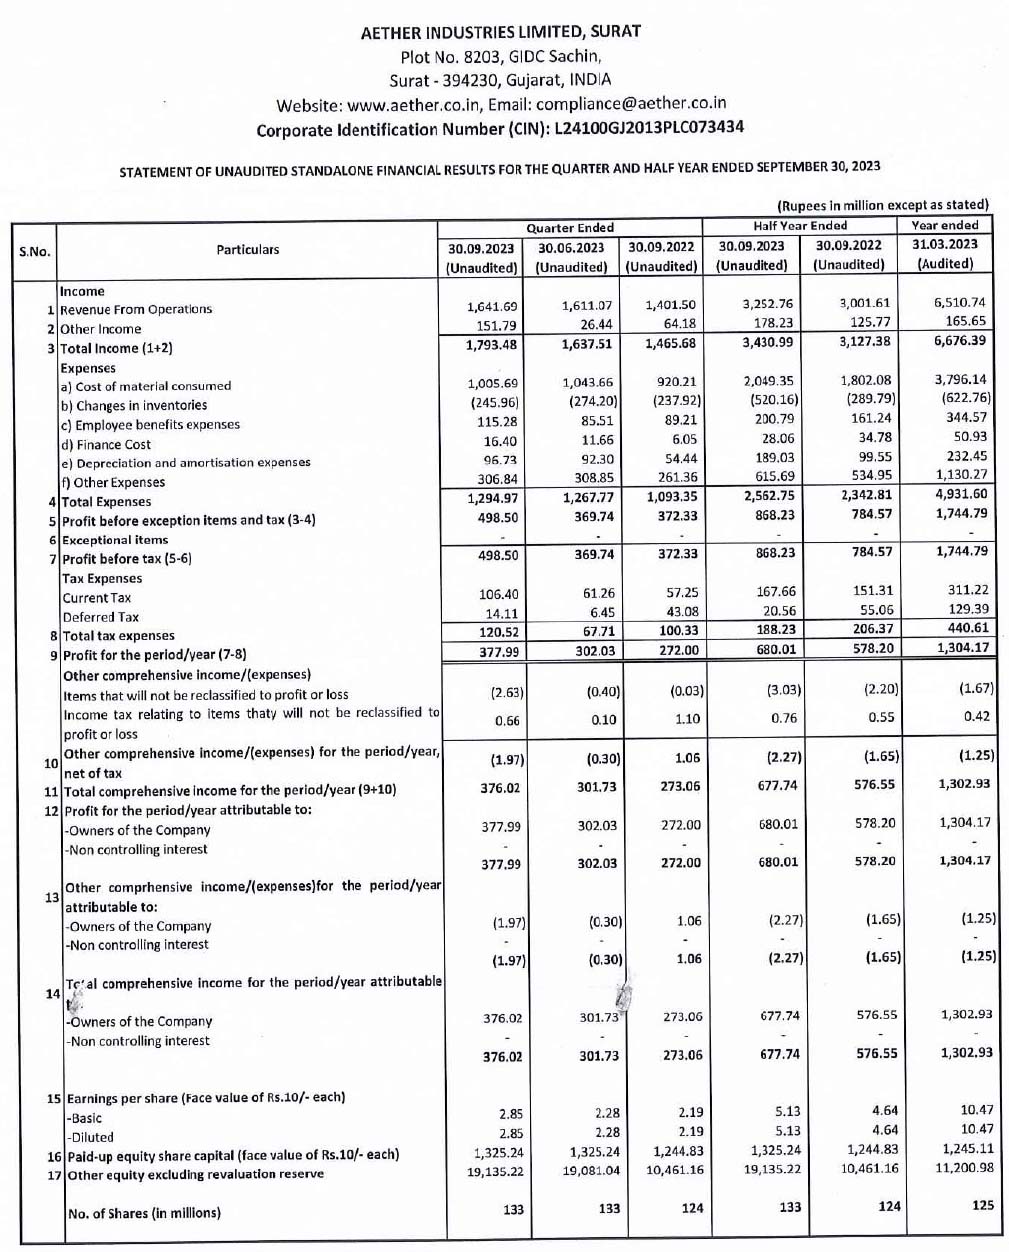 Aether Industries Ltd Second Quarter of Financial Year 2023-2024 Results 1